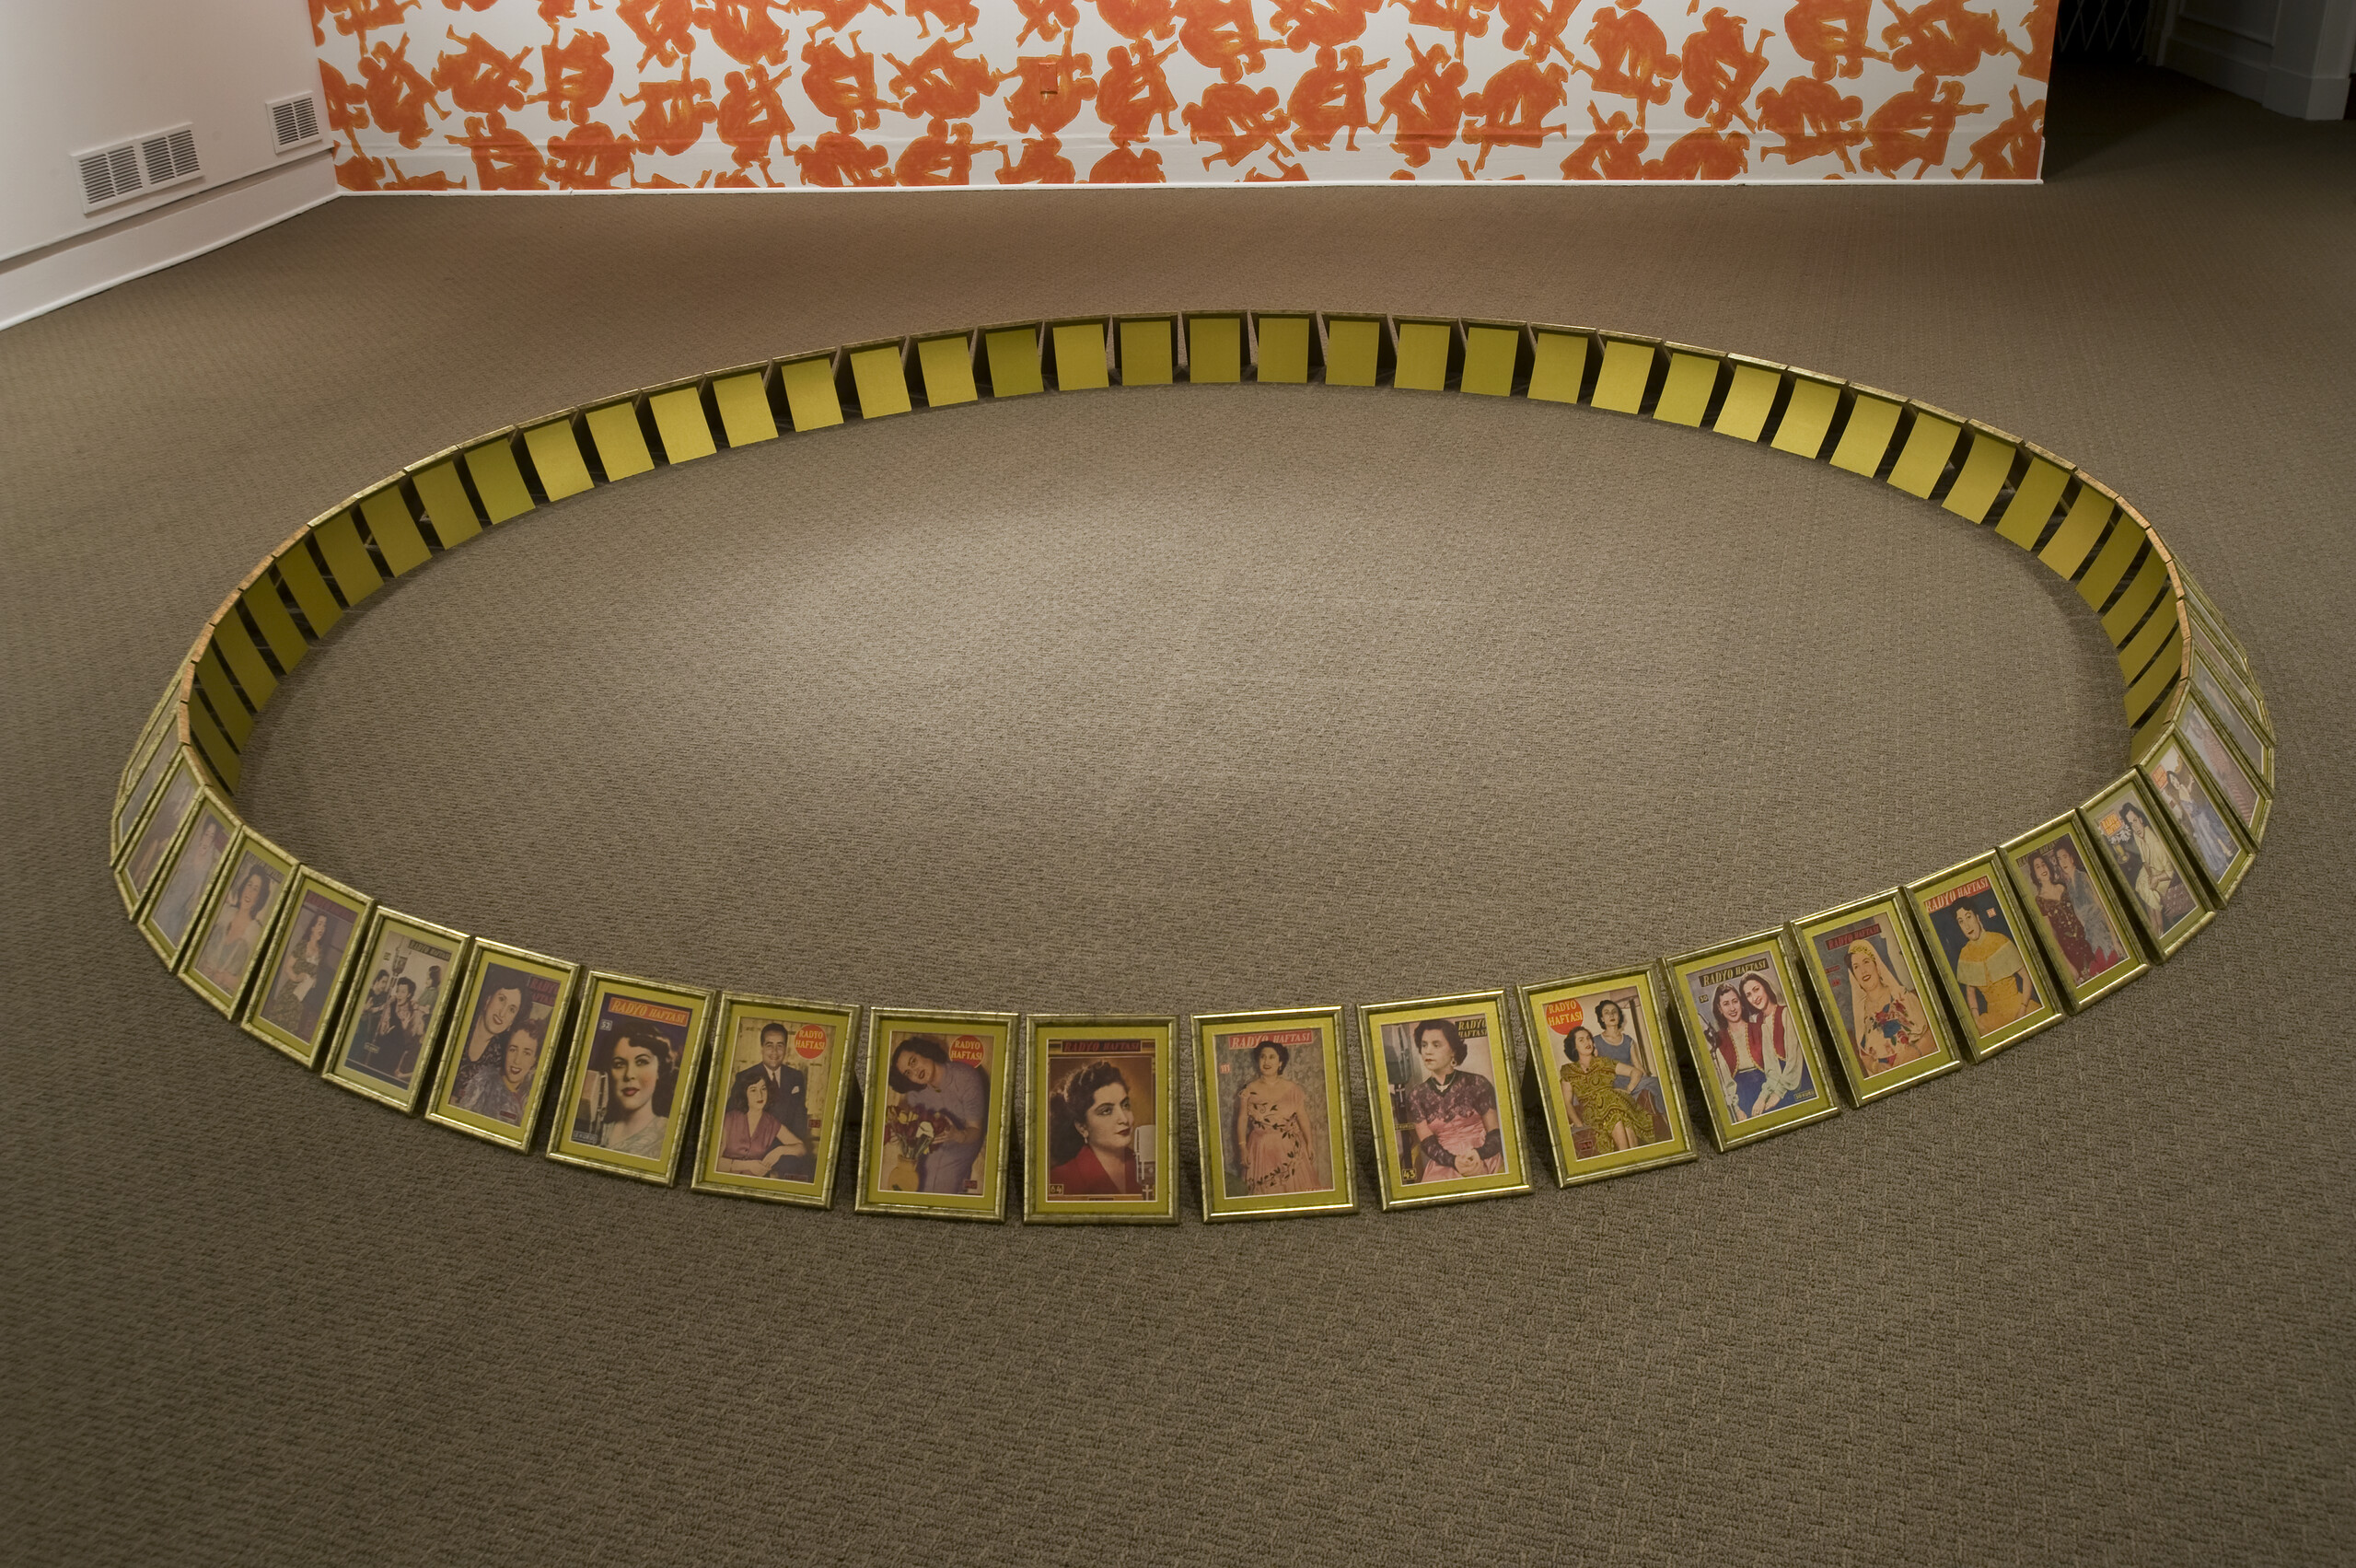 On a gray carpet floor, framed images of women in golden frames are placed in a large circle. The images of the women are vintage-looking. On the wall behind the circle, a large flower print is installed, that looks like a wallpaper, taking up the whole wall. The images in the golden frames look precious, and their placement in a circle creates a community of women.